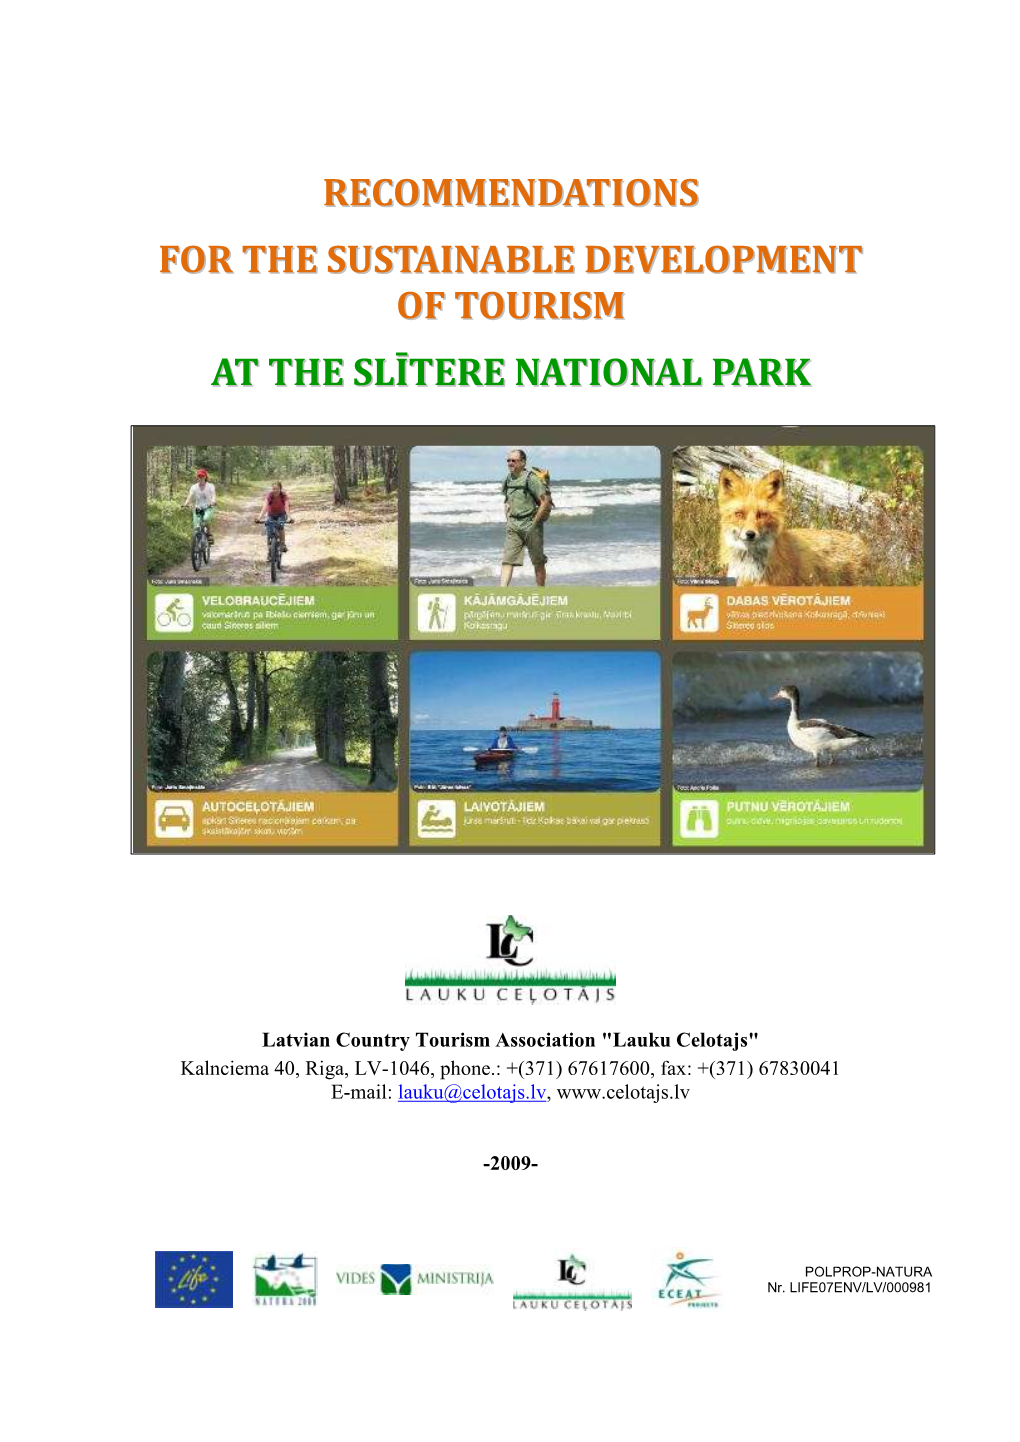 Recommendations for the Sustainable Development of Tourism at the Slītere National Park